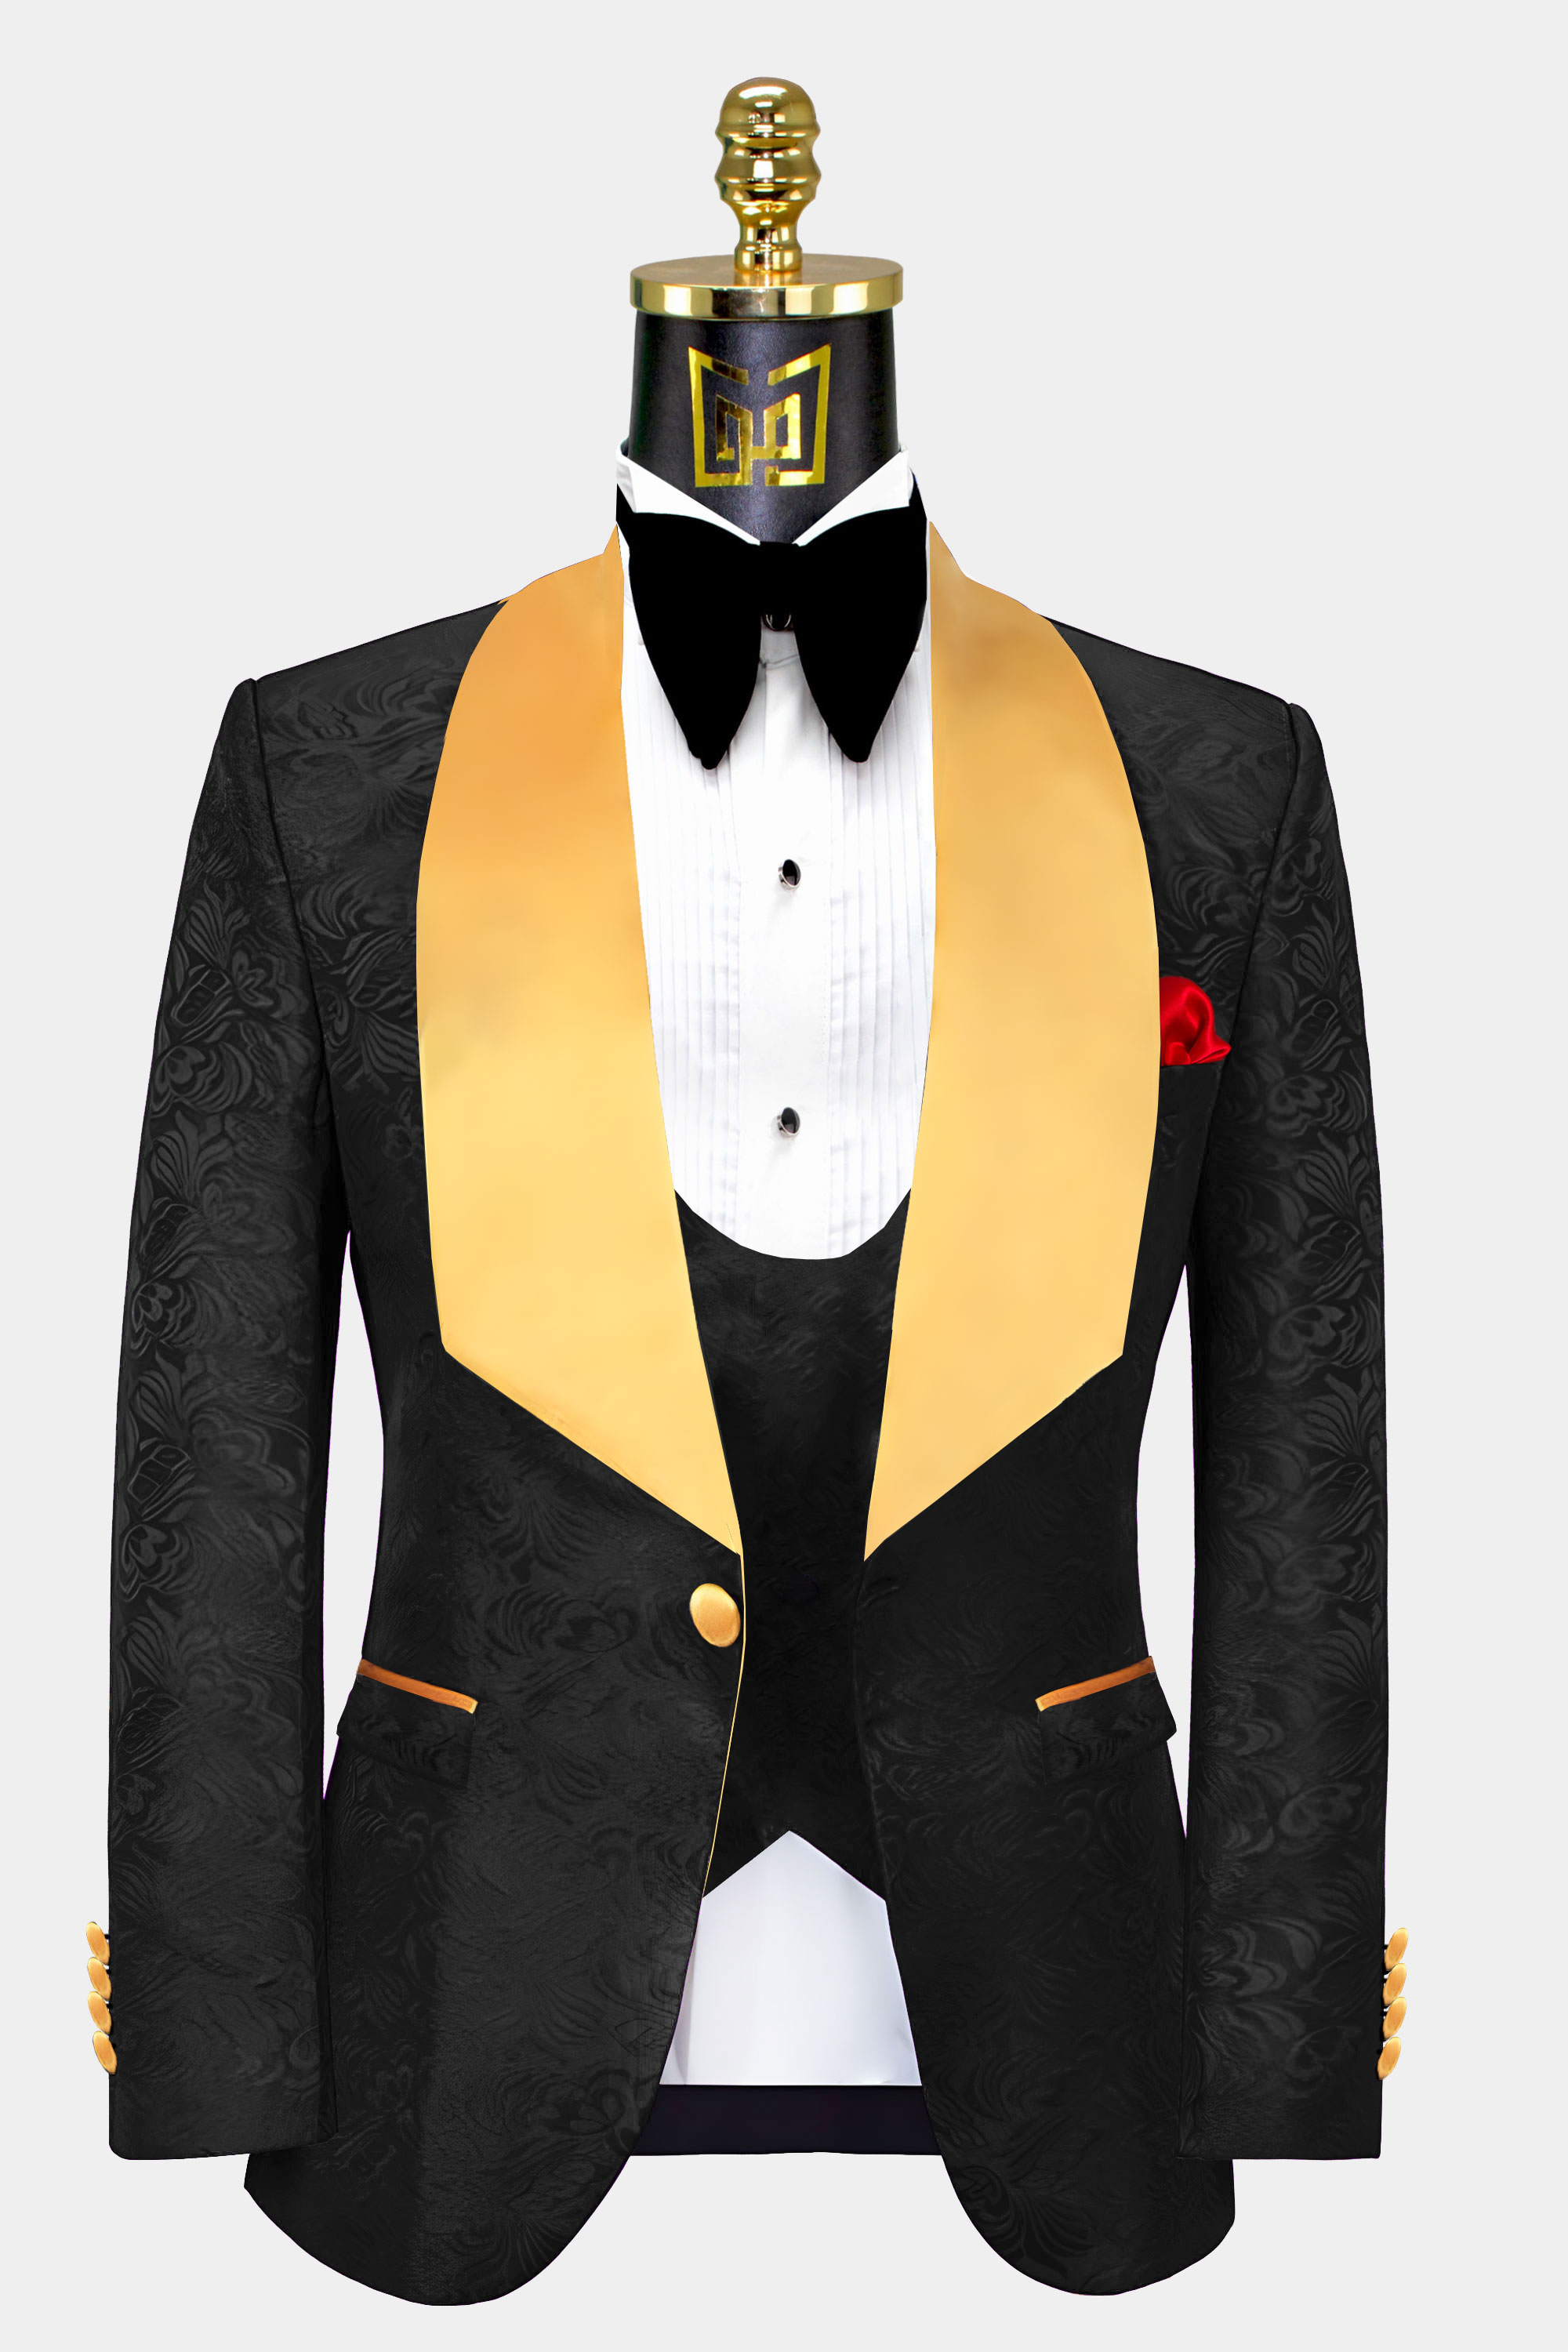 Black And Gold Tux | vlr.eng.br